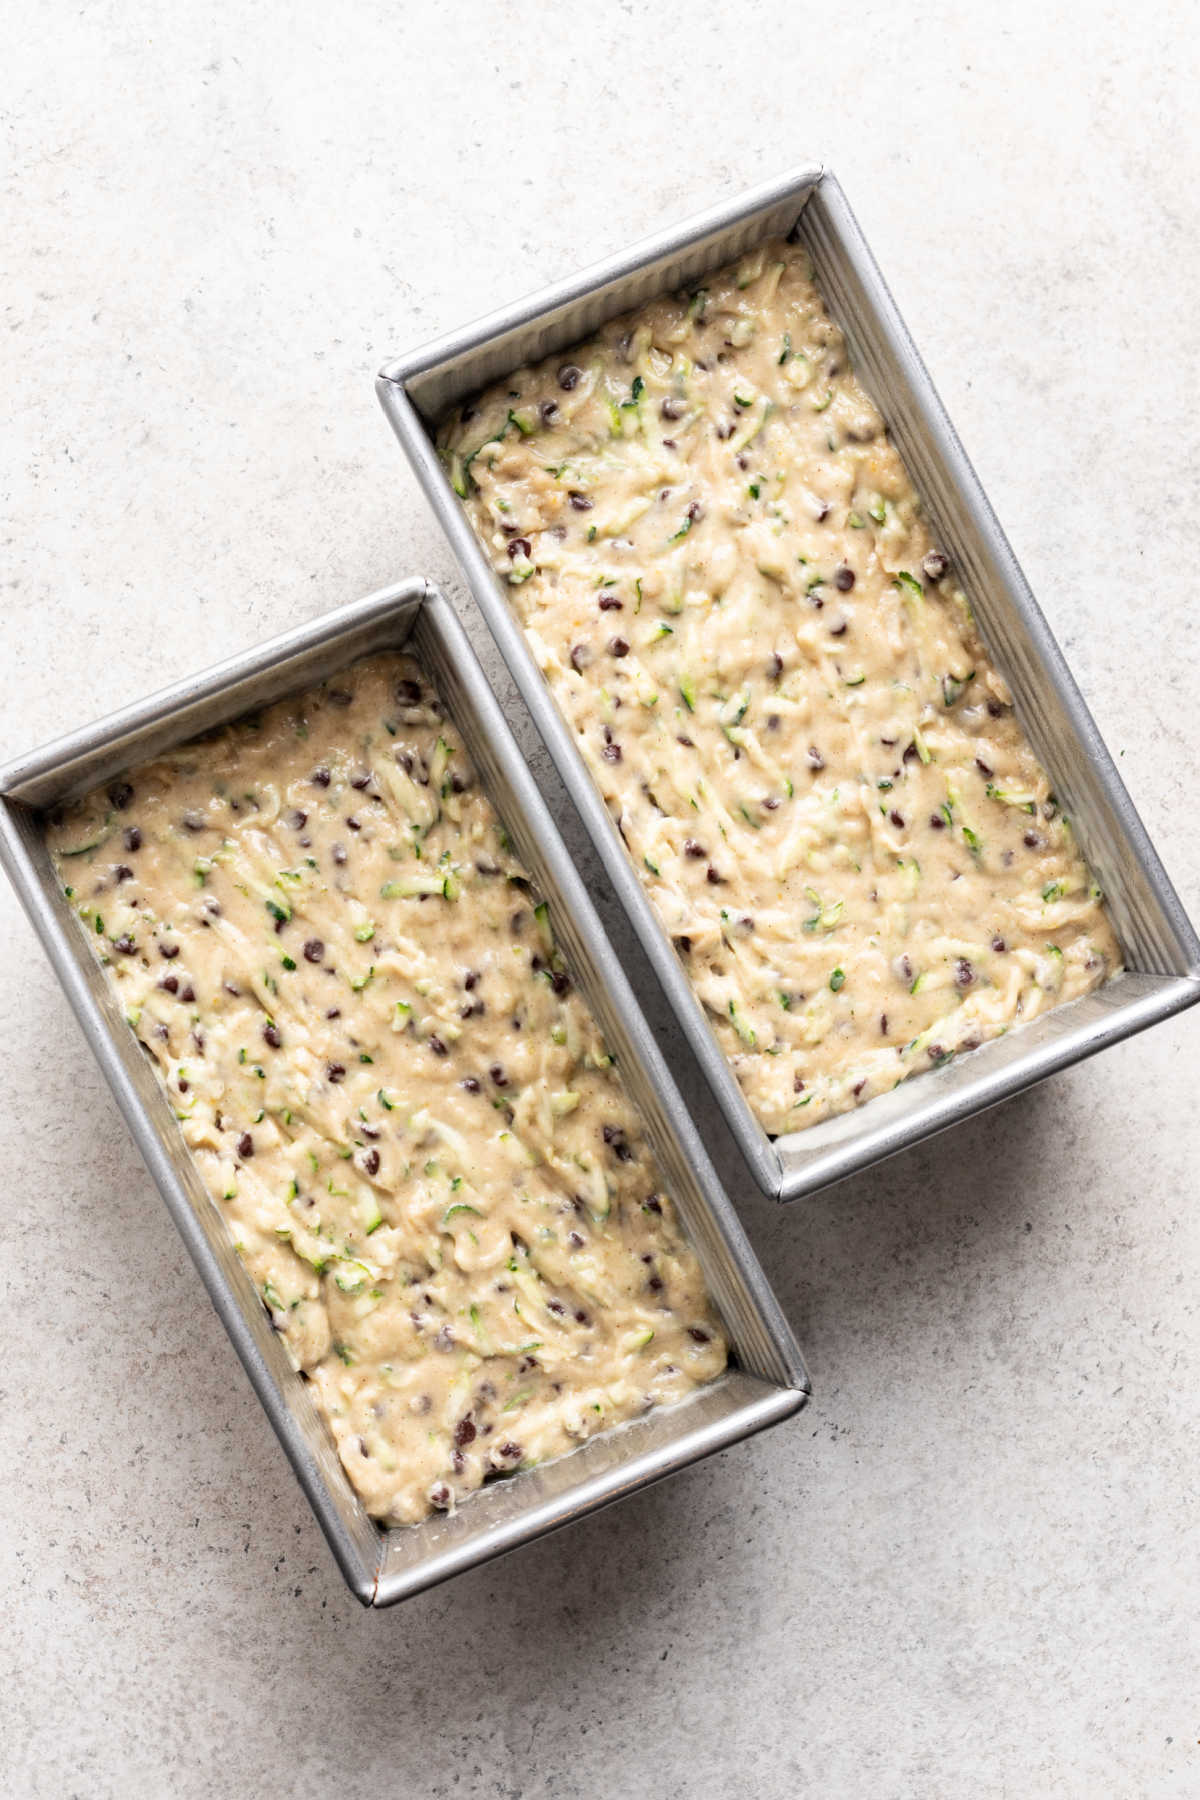 Zucchini bread batter divided into two bread pans. 